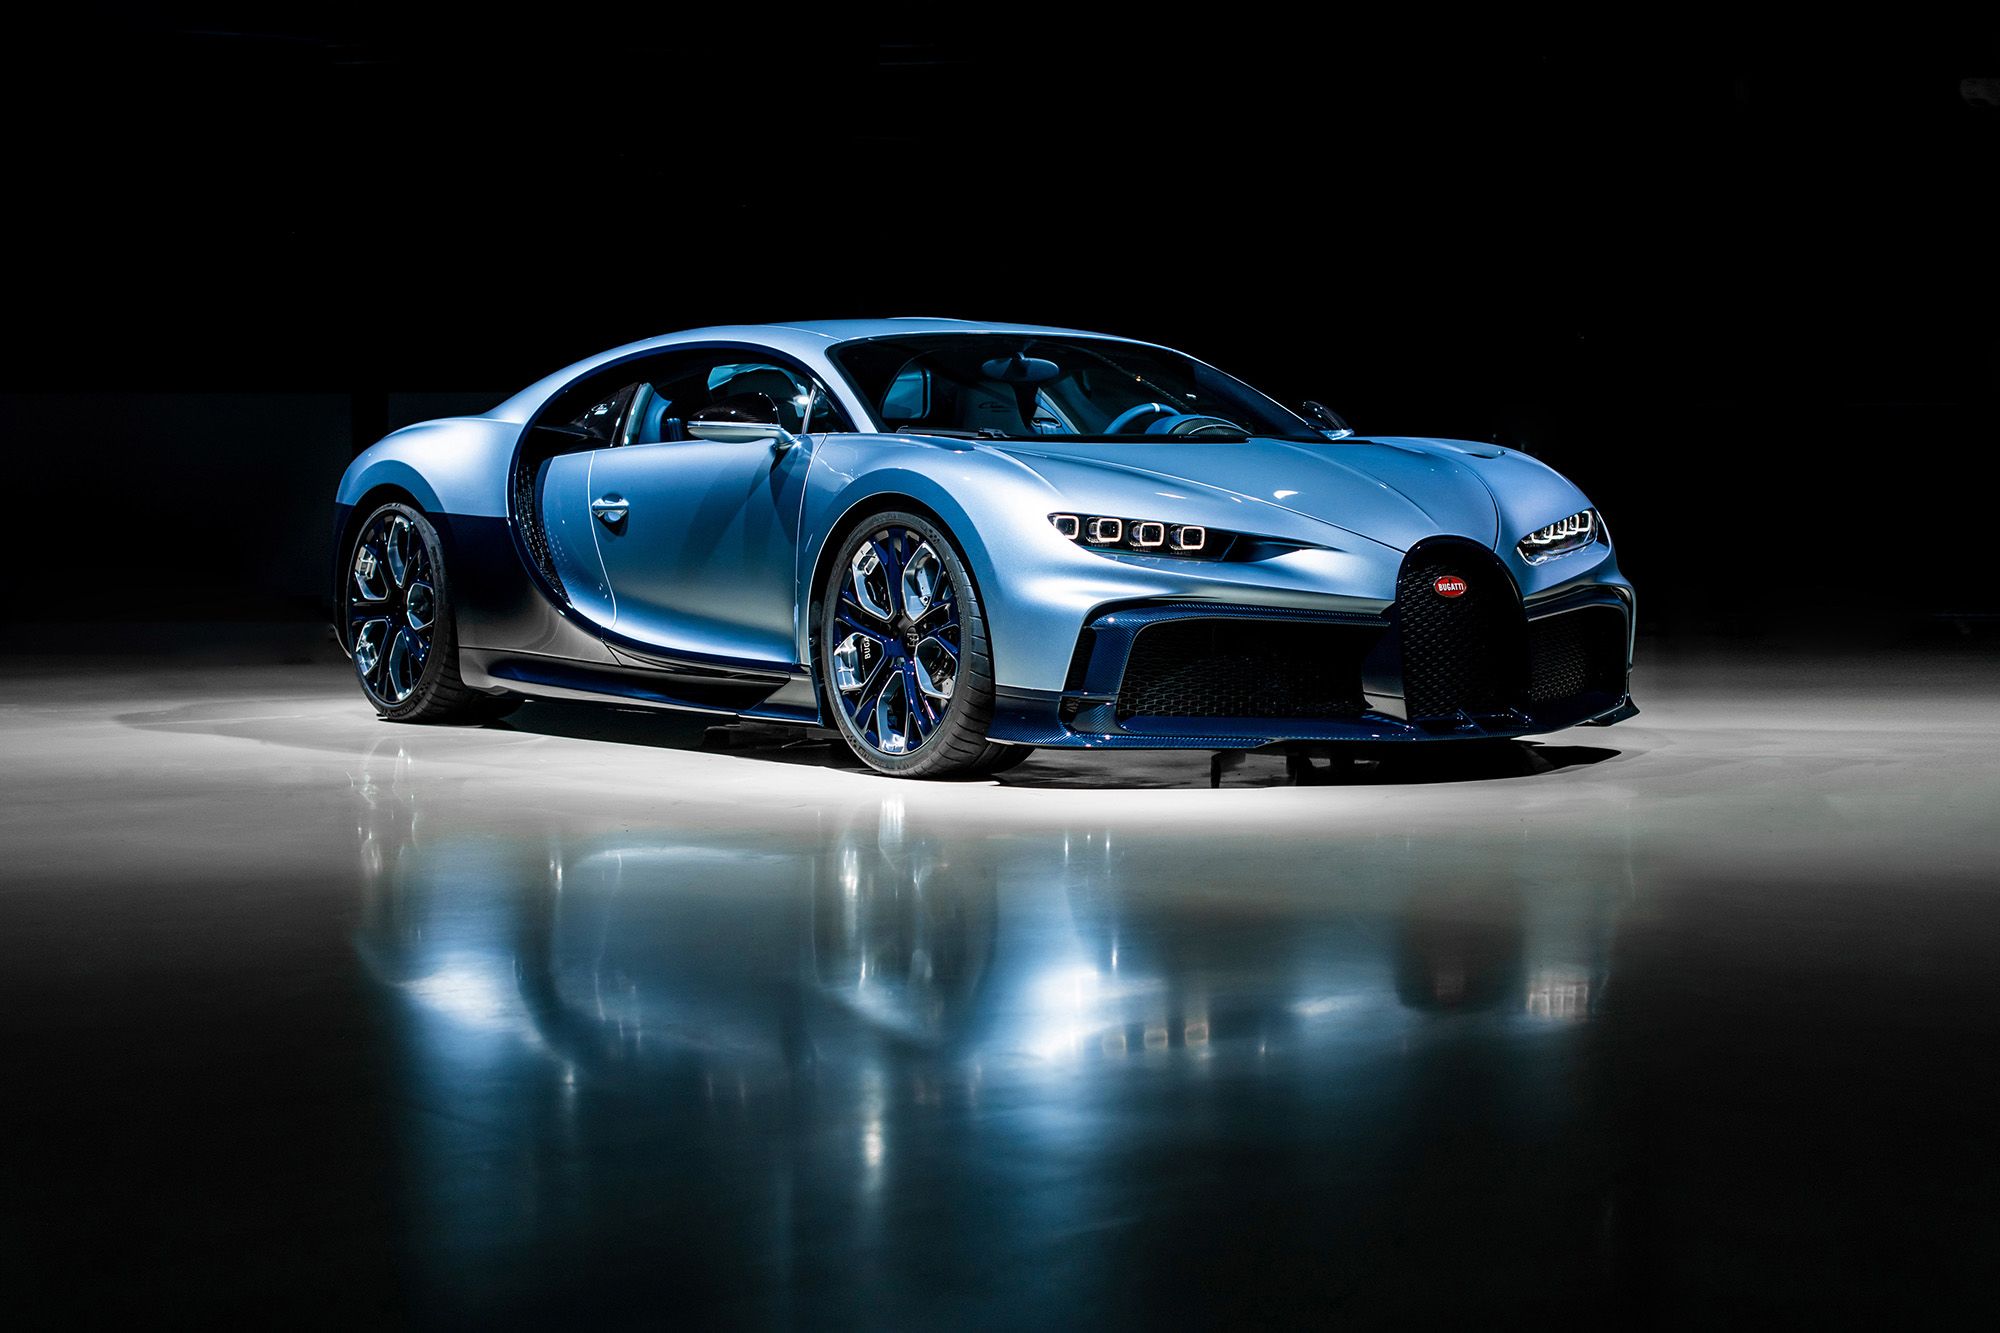 terugtrekken Nauwkeurig Drama Bugatti is auctioning off its last purely gas-powered car and it's one-of-a-kind  | CNN Business